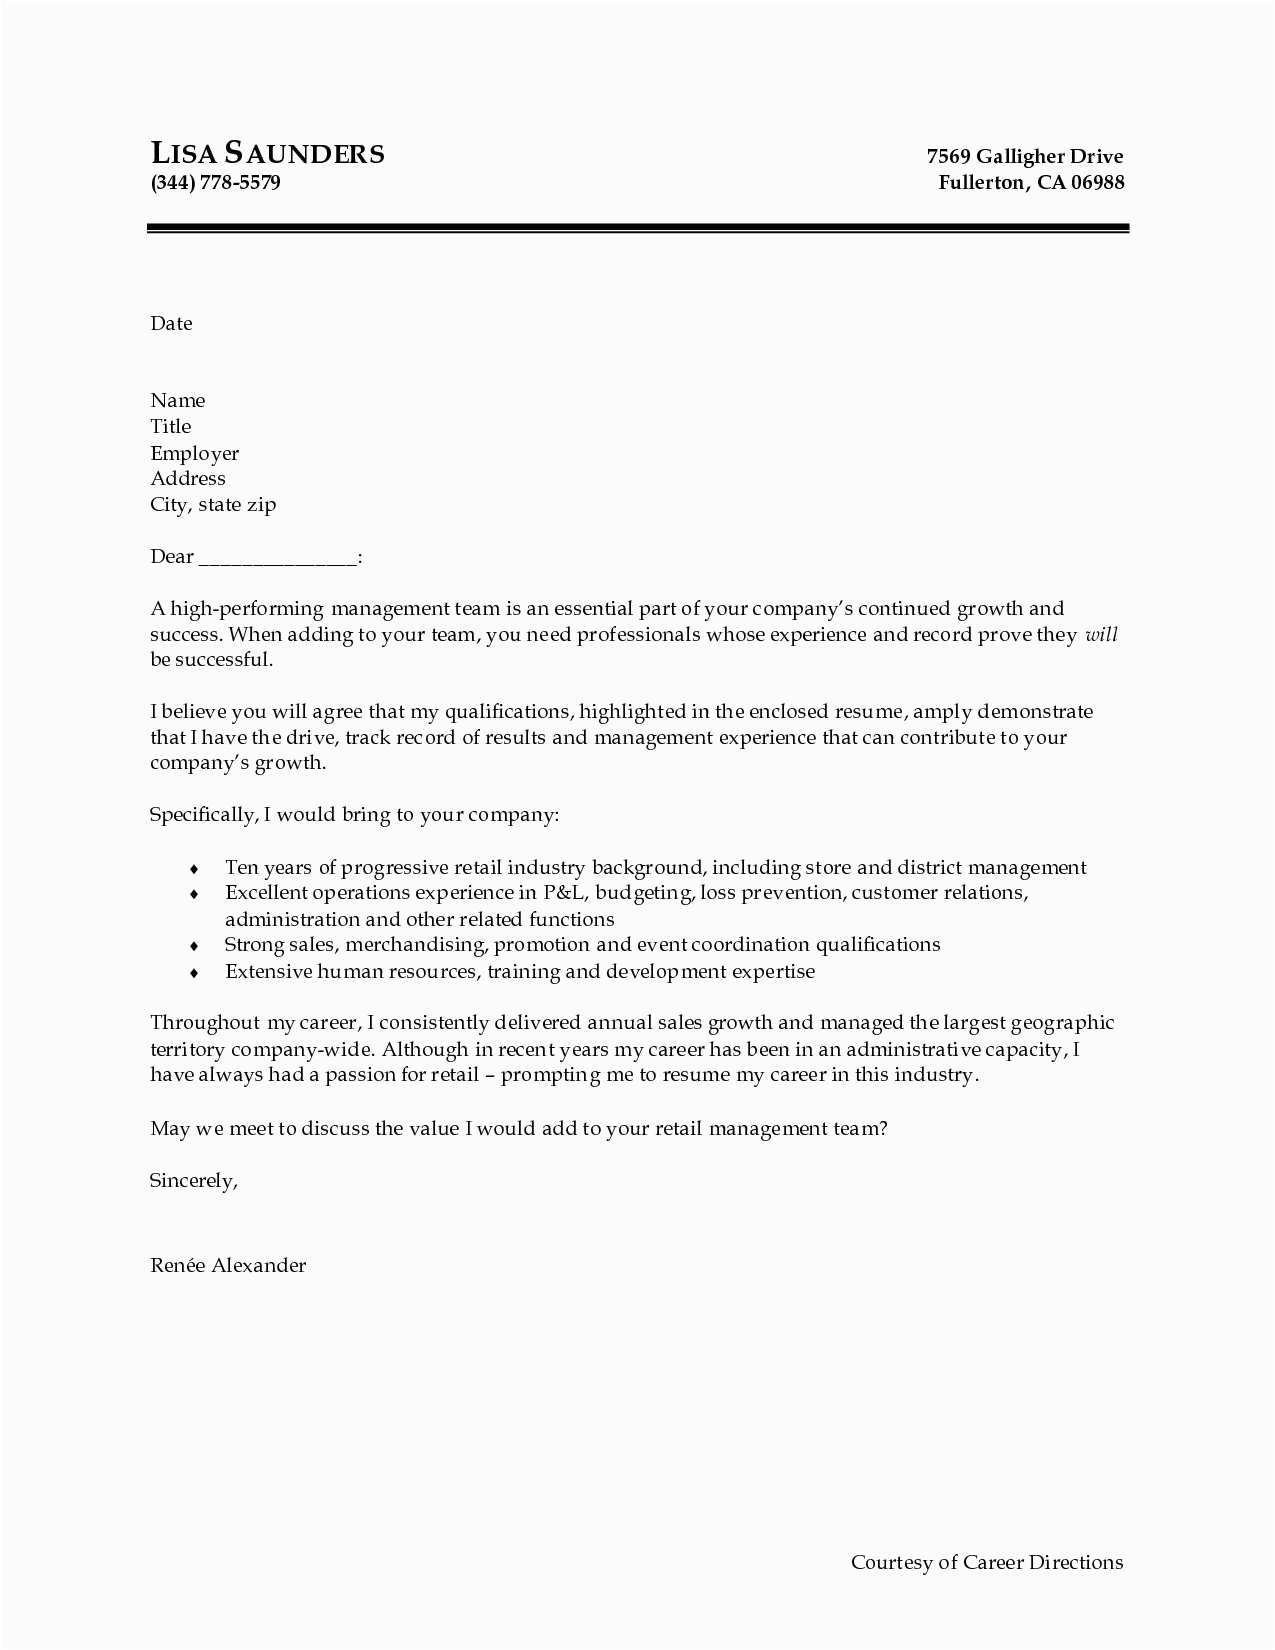 Samples Of Resumes and Cover Letters Free 8 Best Of Free Printable Cover Letters Free